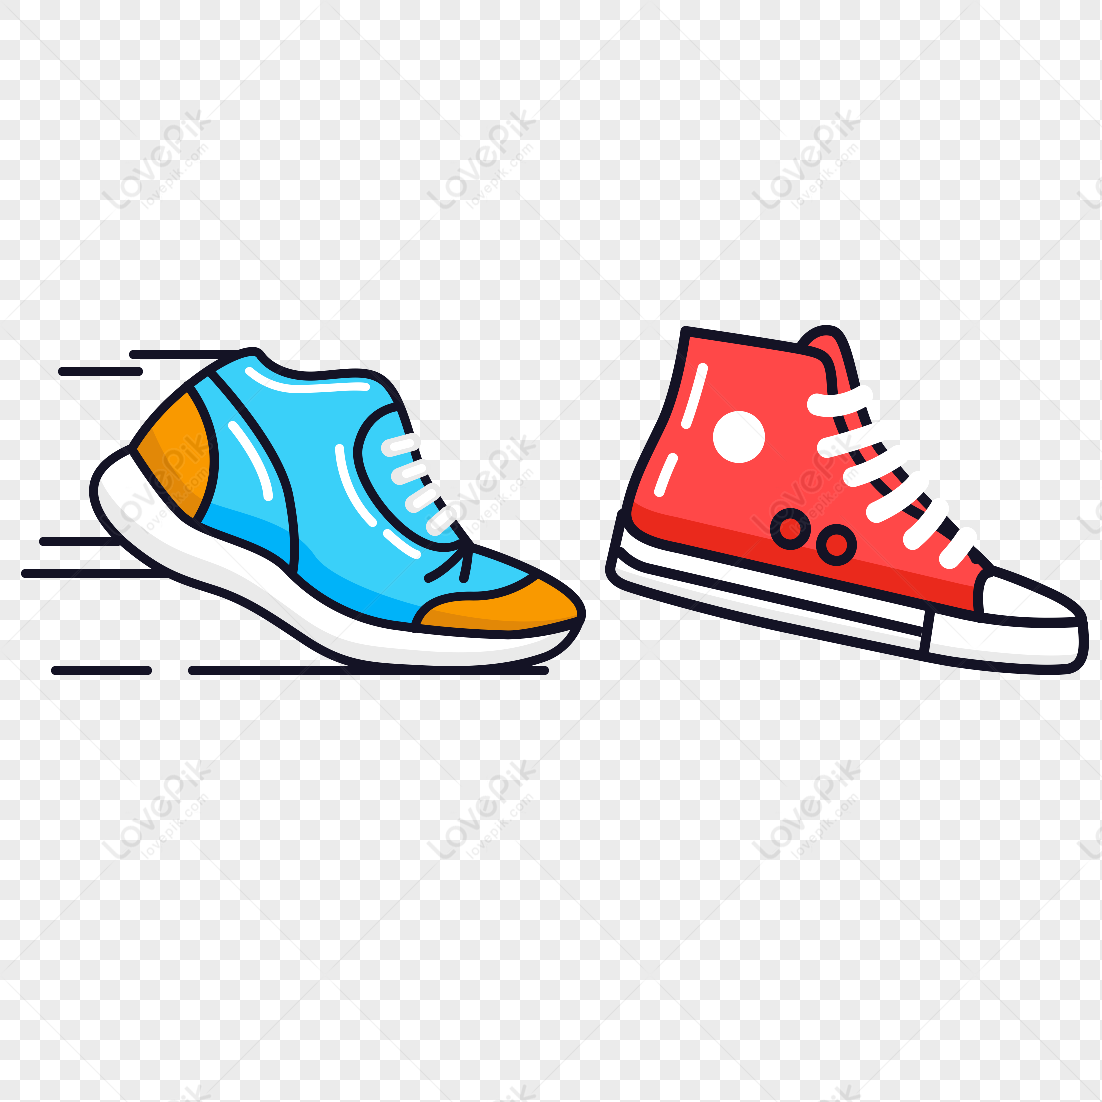 Female Shoes Vector PNG Images With Transparent Background | Free ...